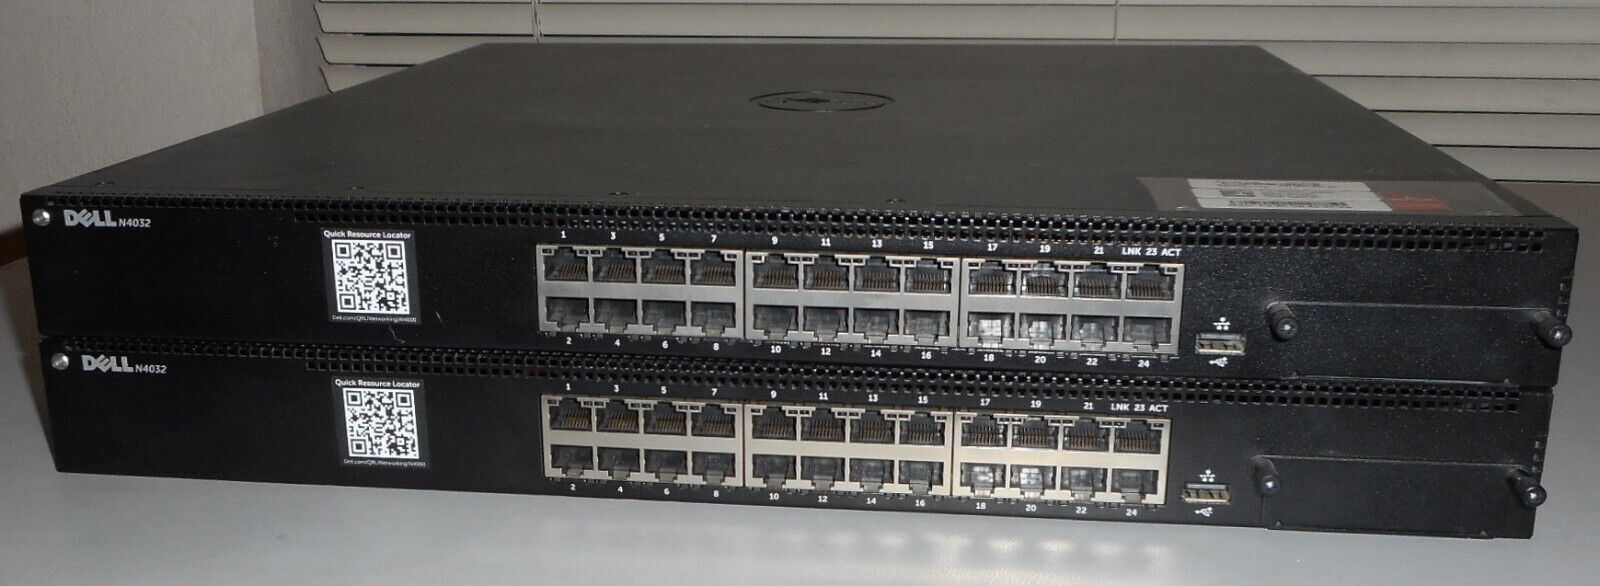 Dell N4032 (PowerConnect 8132) 10GbE switch. - READ